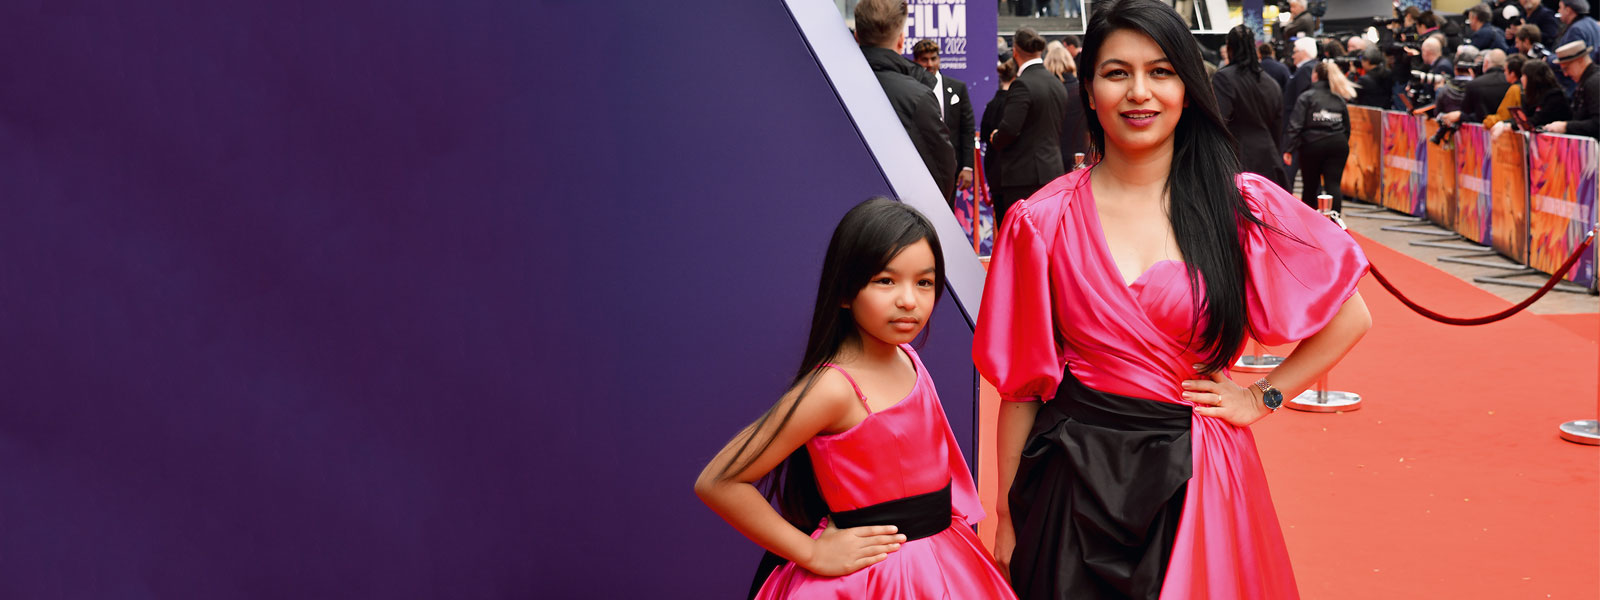 Sanyukta & Ameya dazzled after Cate Blanchett on Red Carpet at the BFI London Film Festival world premiere of Pinocchio